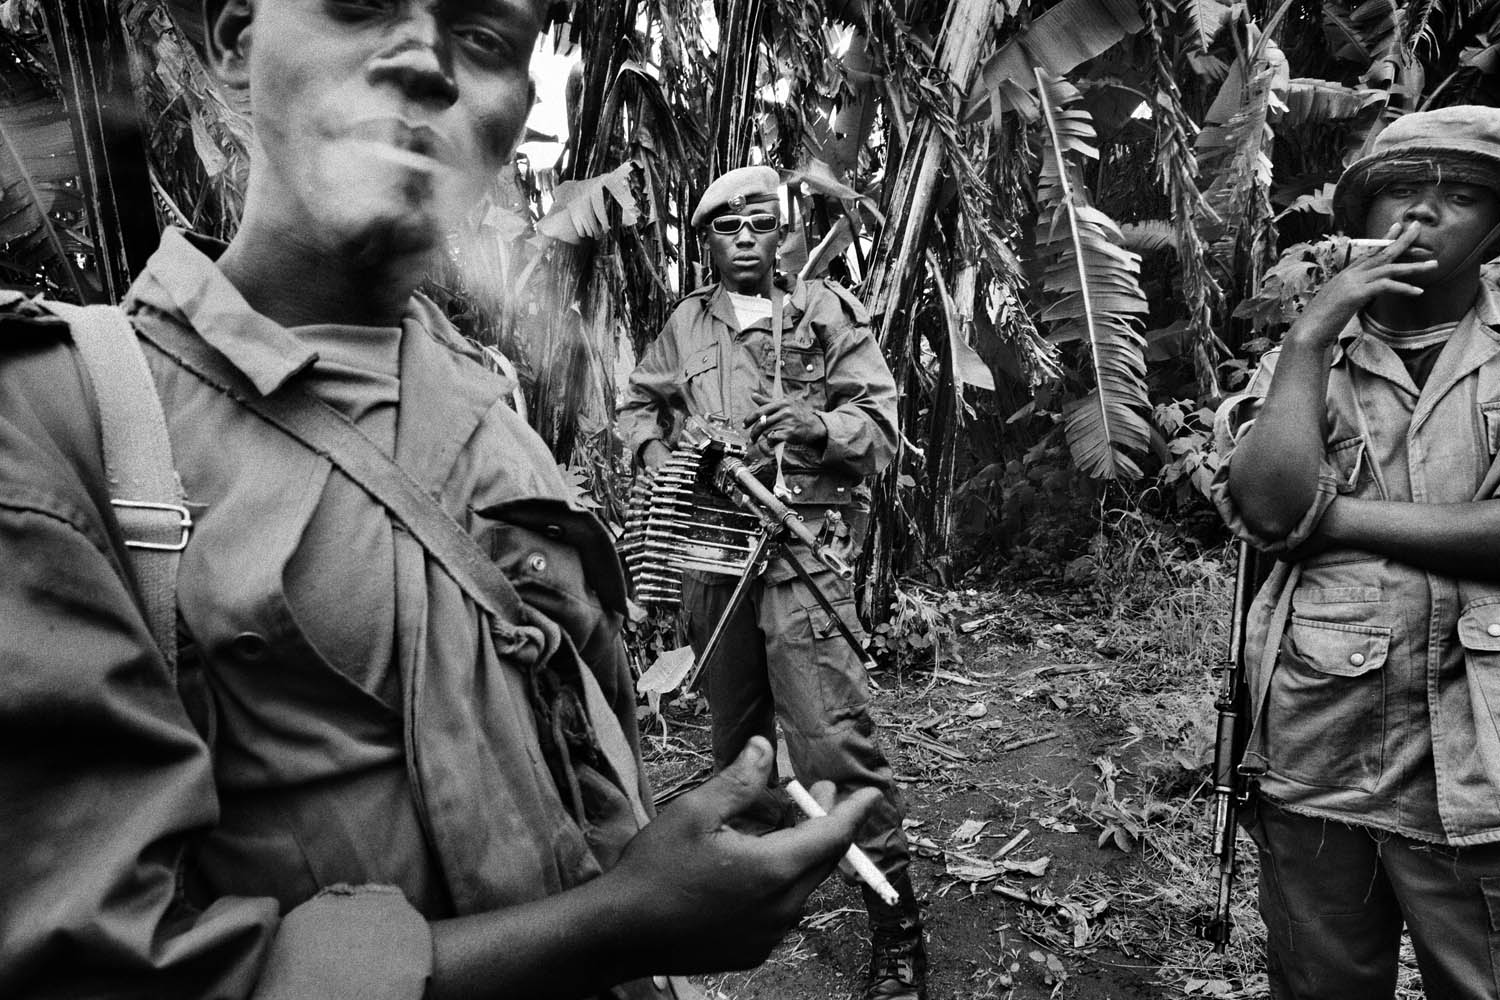 Soldiers of General Mathieu Ngodjolo, leader of the MRC (Movement for the Revolution of Congo) militia, in their stronghold of Zumbe in 2006. The militia, like their government-soldier counterparts, have been accused by Human Rights Watch of using rape as a weapon of war.